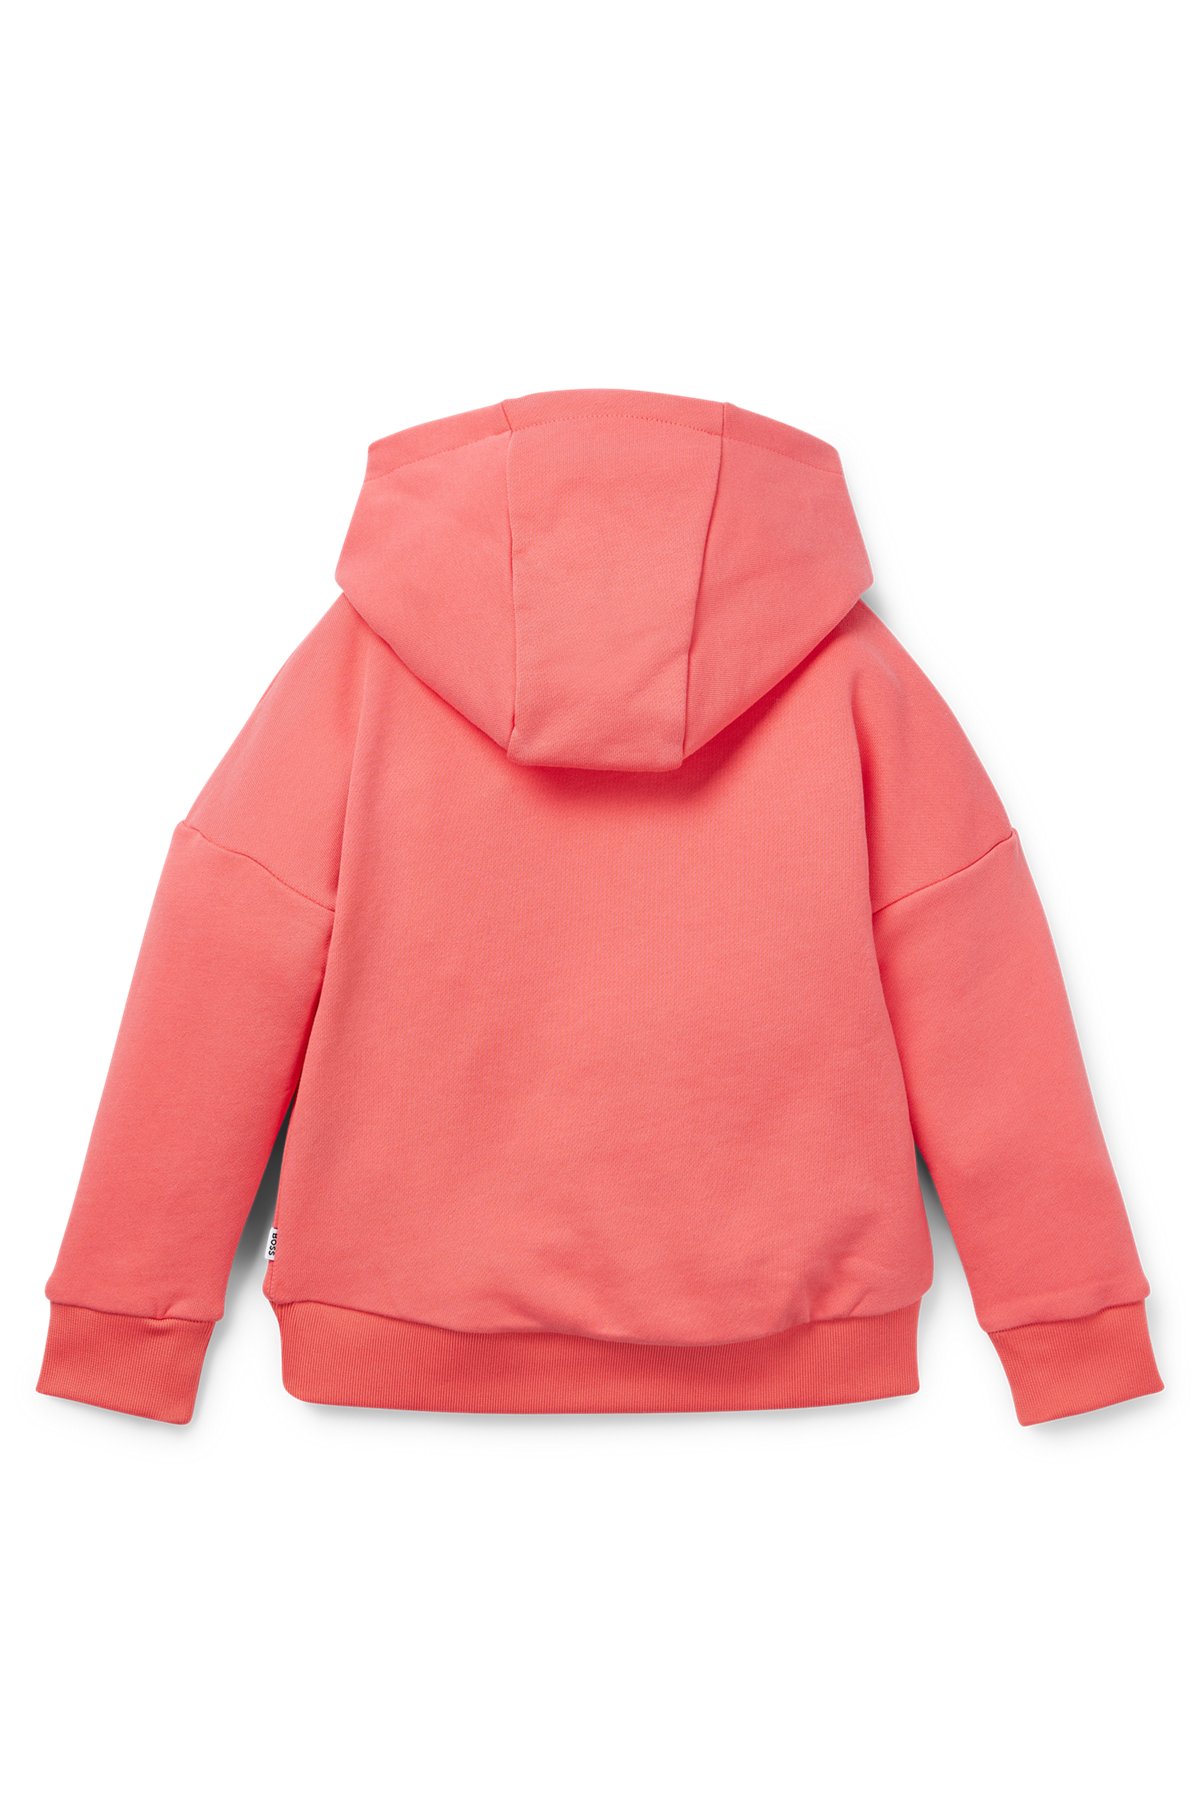 Kids' hoodie in cotton with logo detail, Light Red